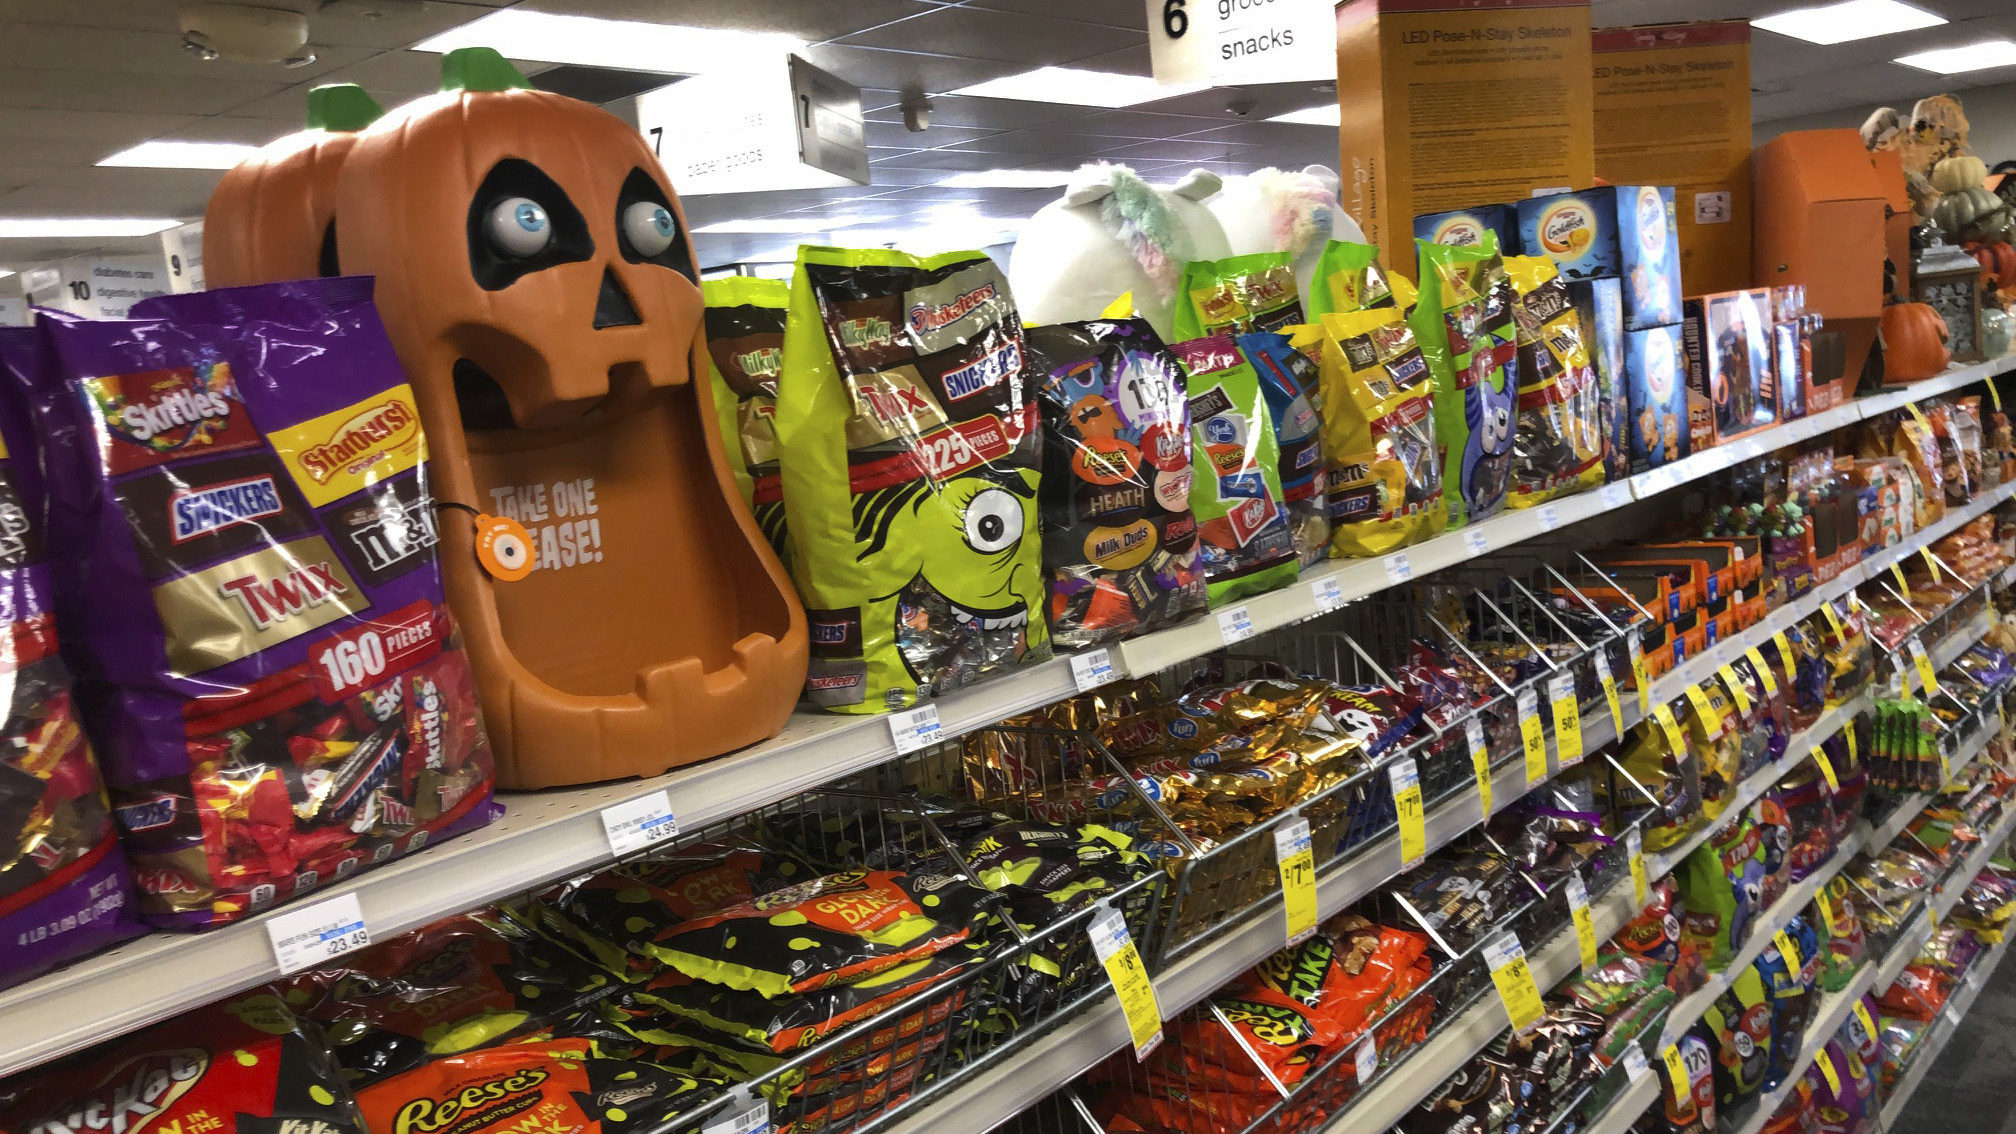 Halloween candy is stocked on shelves at a store. Hershey candy may be sparse...